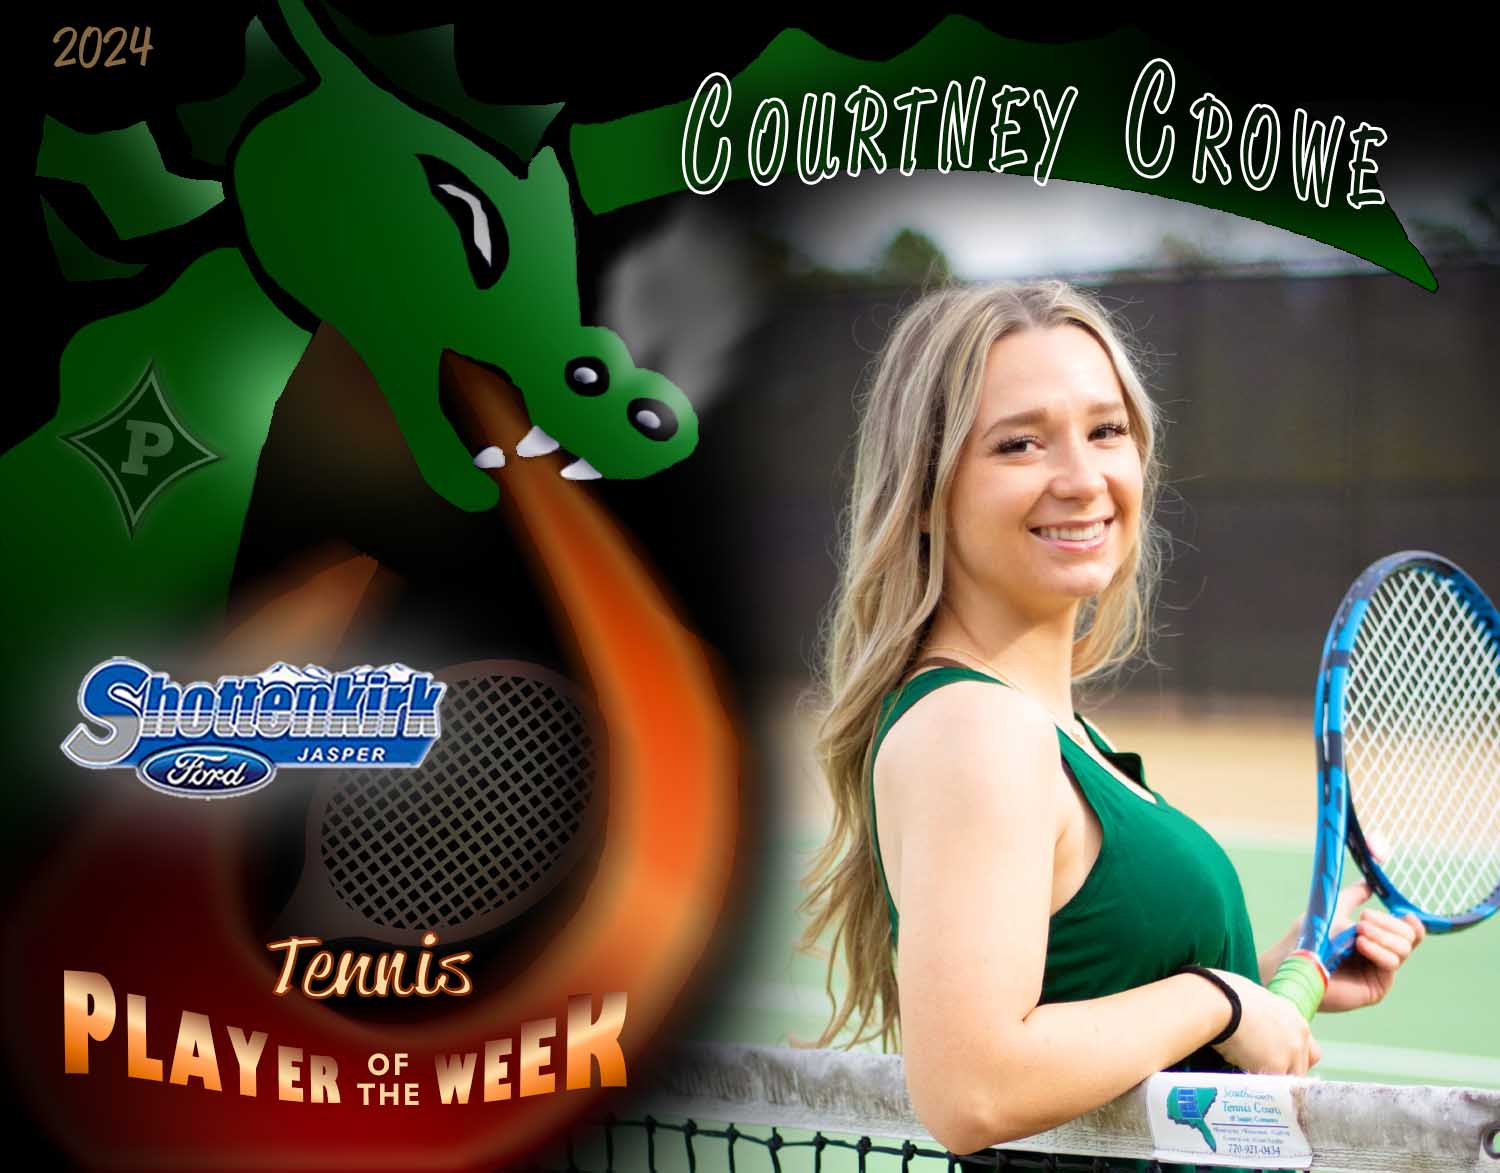 PHS Girls Tennis Player of the Week #2 - Courtney Crowe